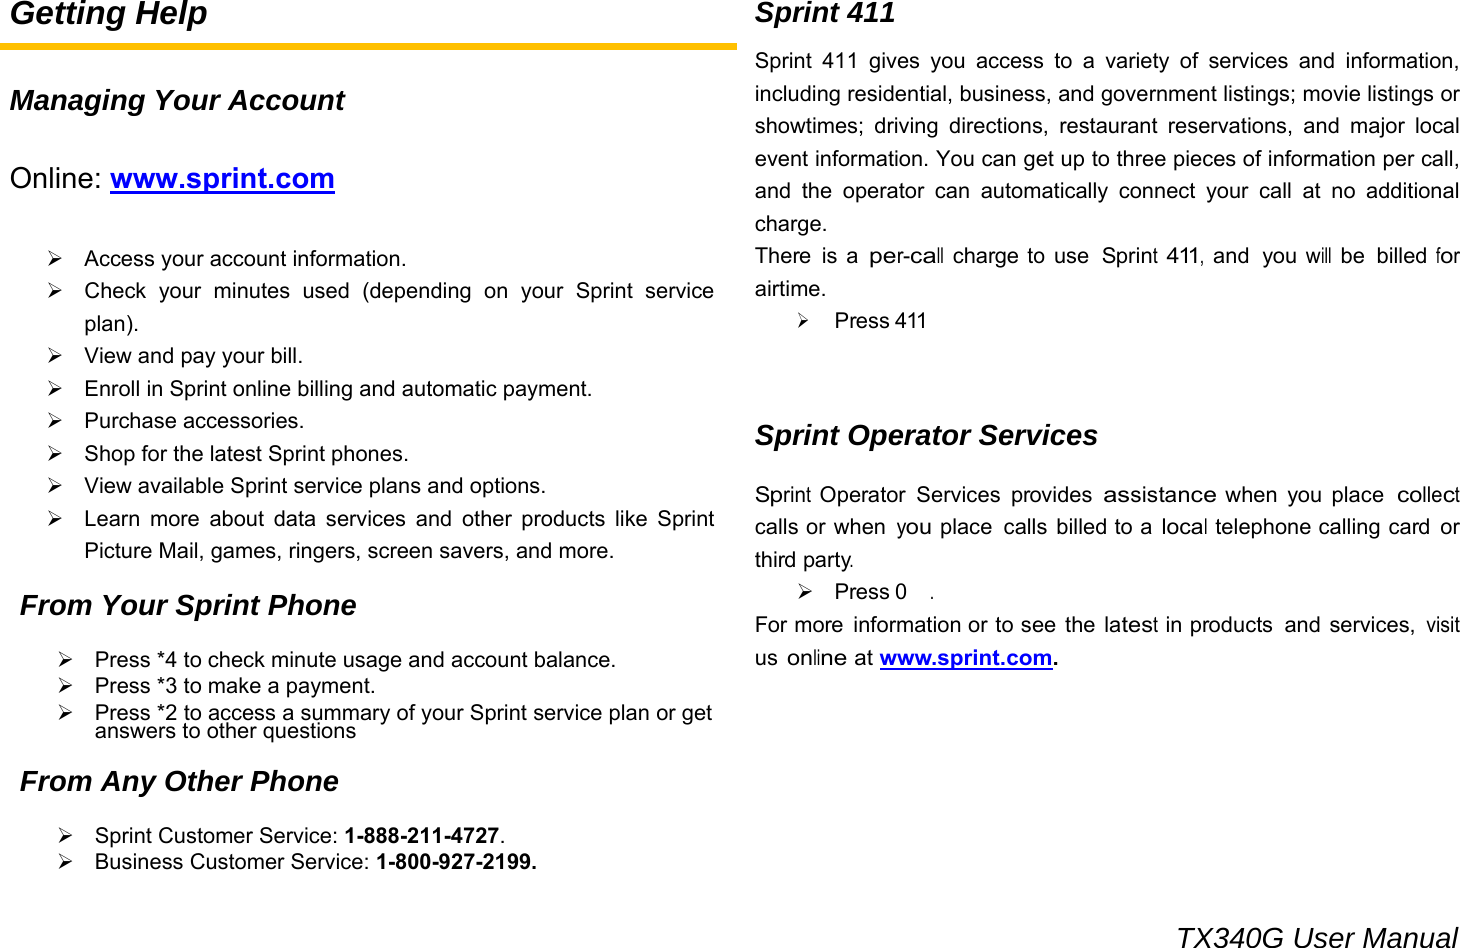                                                                                 TX340G User Manual Getting Help  Managing Your Account  Online: www.sprint.com  ¾  Access your account information. ¾  Check your minutes used (depending on your Sprint service plan). ¾  View and pay your bill. ¾  Enroll in Sprint online billing and automatic payment. ¾ Purchase accessories. ¾  Shop for the latest Sprint phones. ¾  View available Sprint service plans and options. ¾  Learn more about data services and other products like Sprint Picture Mail, games, ringers, screen savers, and more.  From Your Sprint Phone  ¾  Press *4 to check minute usage and account balance. ¾  Press *3 to make a payment. ¾  Press *2 to access a summary of your Sprint service plan or get answers to other questions  From Any Other Phone  ¾  Sprint Customer Service: 1-888-211-4727. ¾  Business Customer Service: 1-800-927-2199. Sprint 411 Sprint 411 gives you access to a variety of services and information, including residential, business, and government listings; movie listings or showtimes; driving directions, restaurant reservations, and major local event information. You can get up to three pieces of information per call, and the operator can automatically connect your call at no additional charge. There is a per-call charge to use Sprint 411, and  you will be  billed for airtime. ¾ Press 411   Sprint Operator Services  Sprint Operator  Services provides assistance when you place collect calls or when you place  calls billed to a local telephone calling card or third party. ¾ Press 0 . For more  information or to see the latest in products  and services, visit us online at www.sprint.com.       